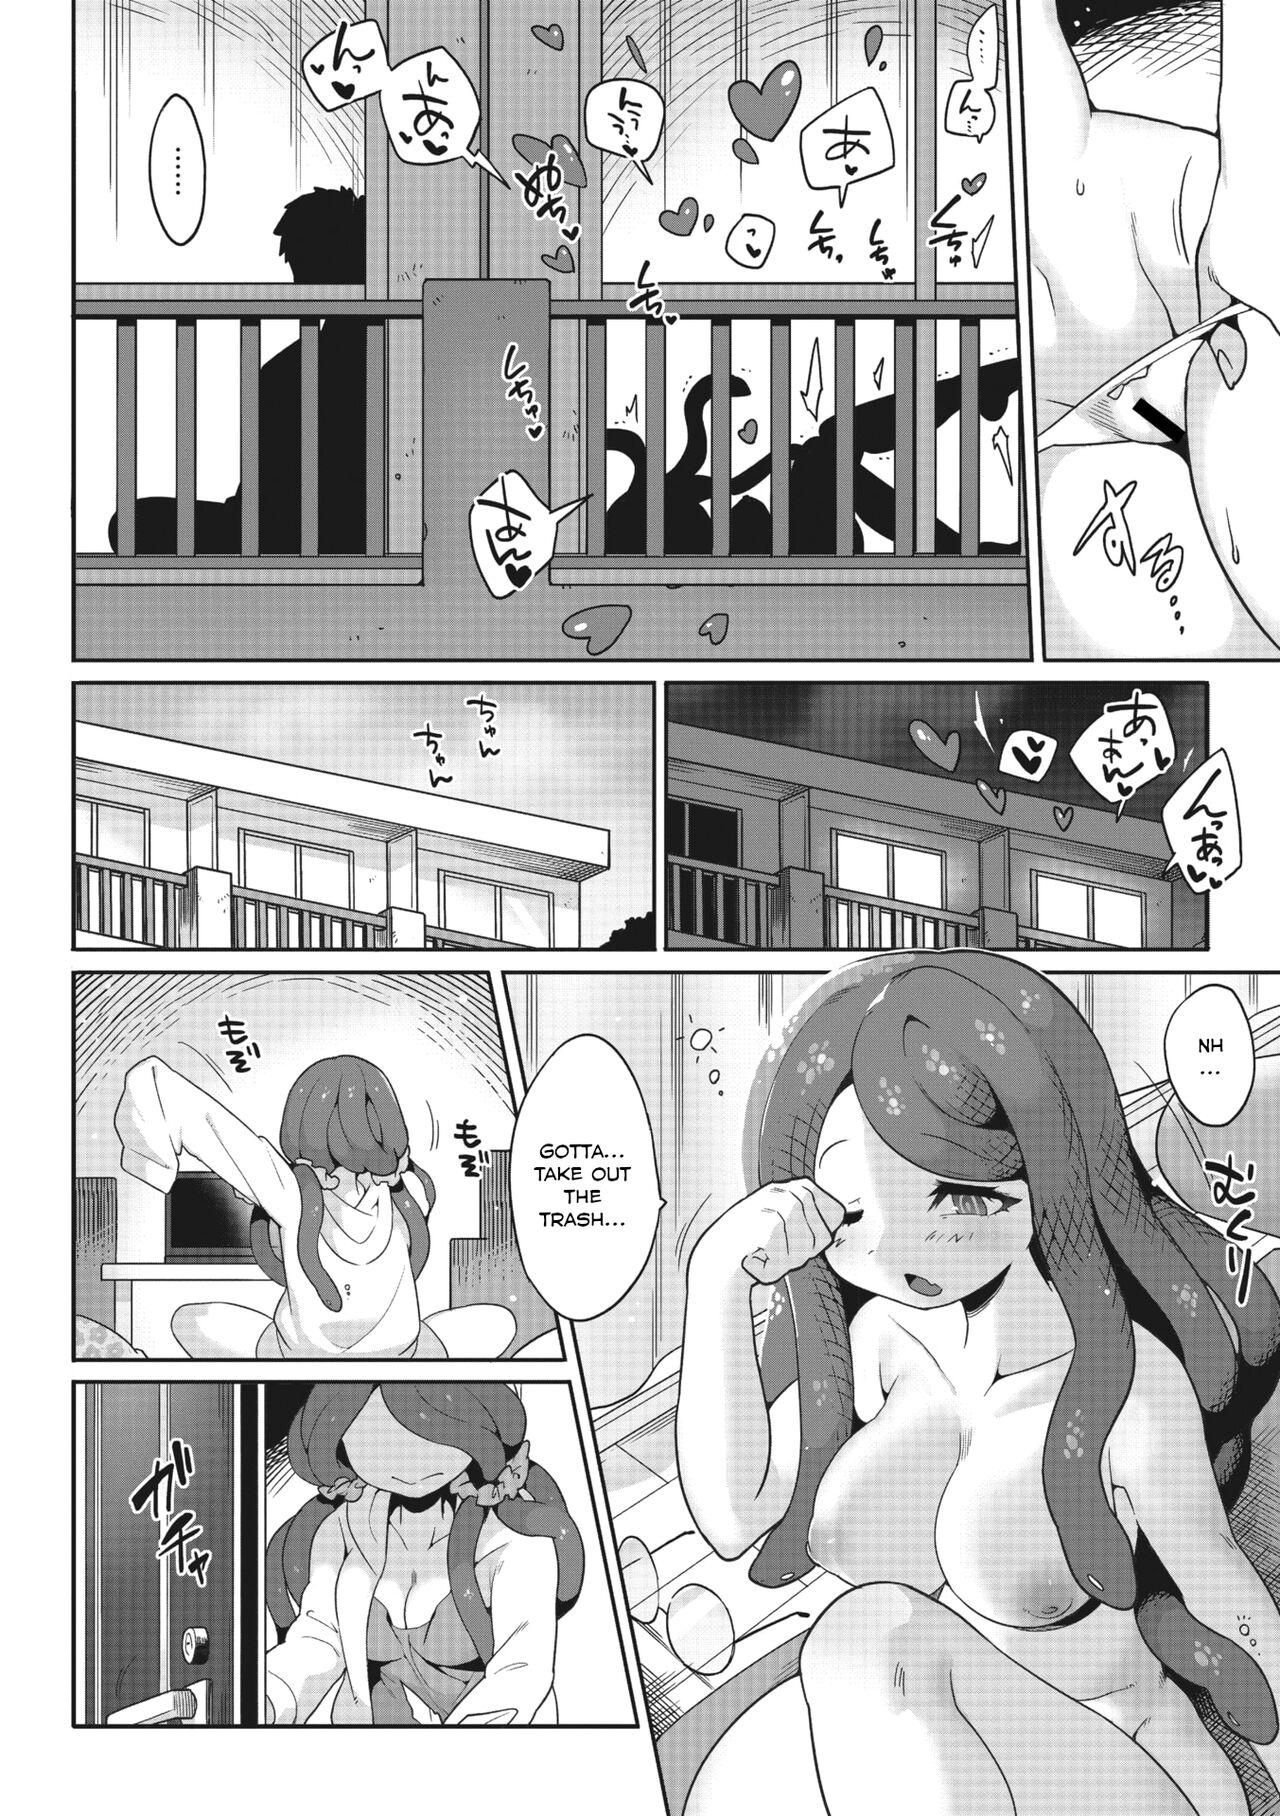 Sexteen Mitsumenaide, dakishimete. | Don't look, just hold me. Sexy - Page 2